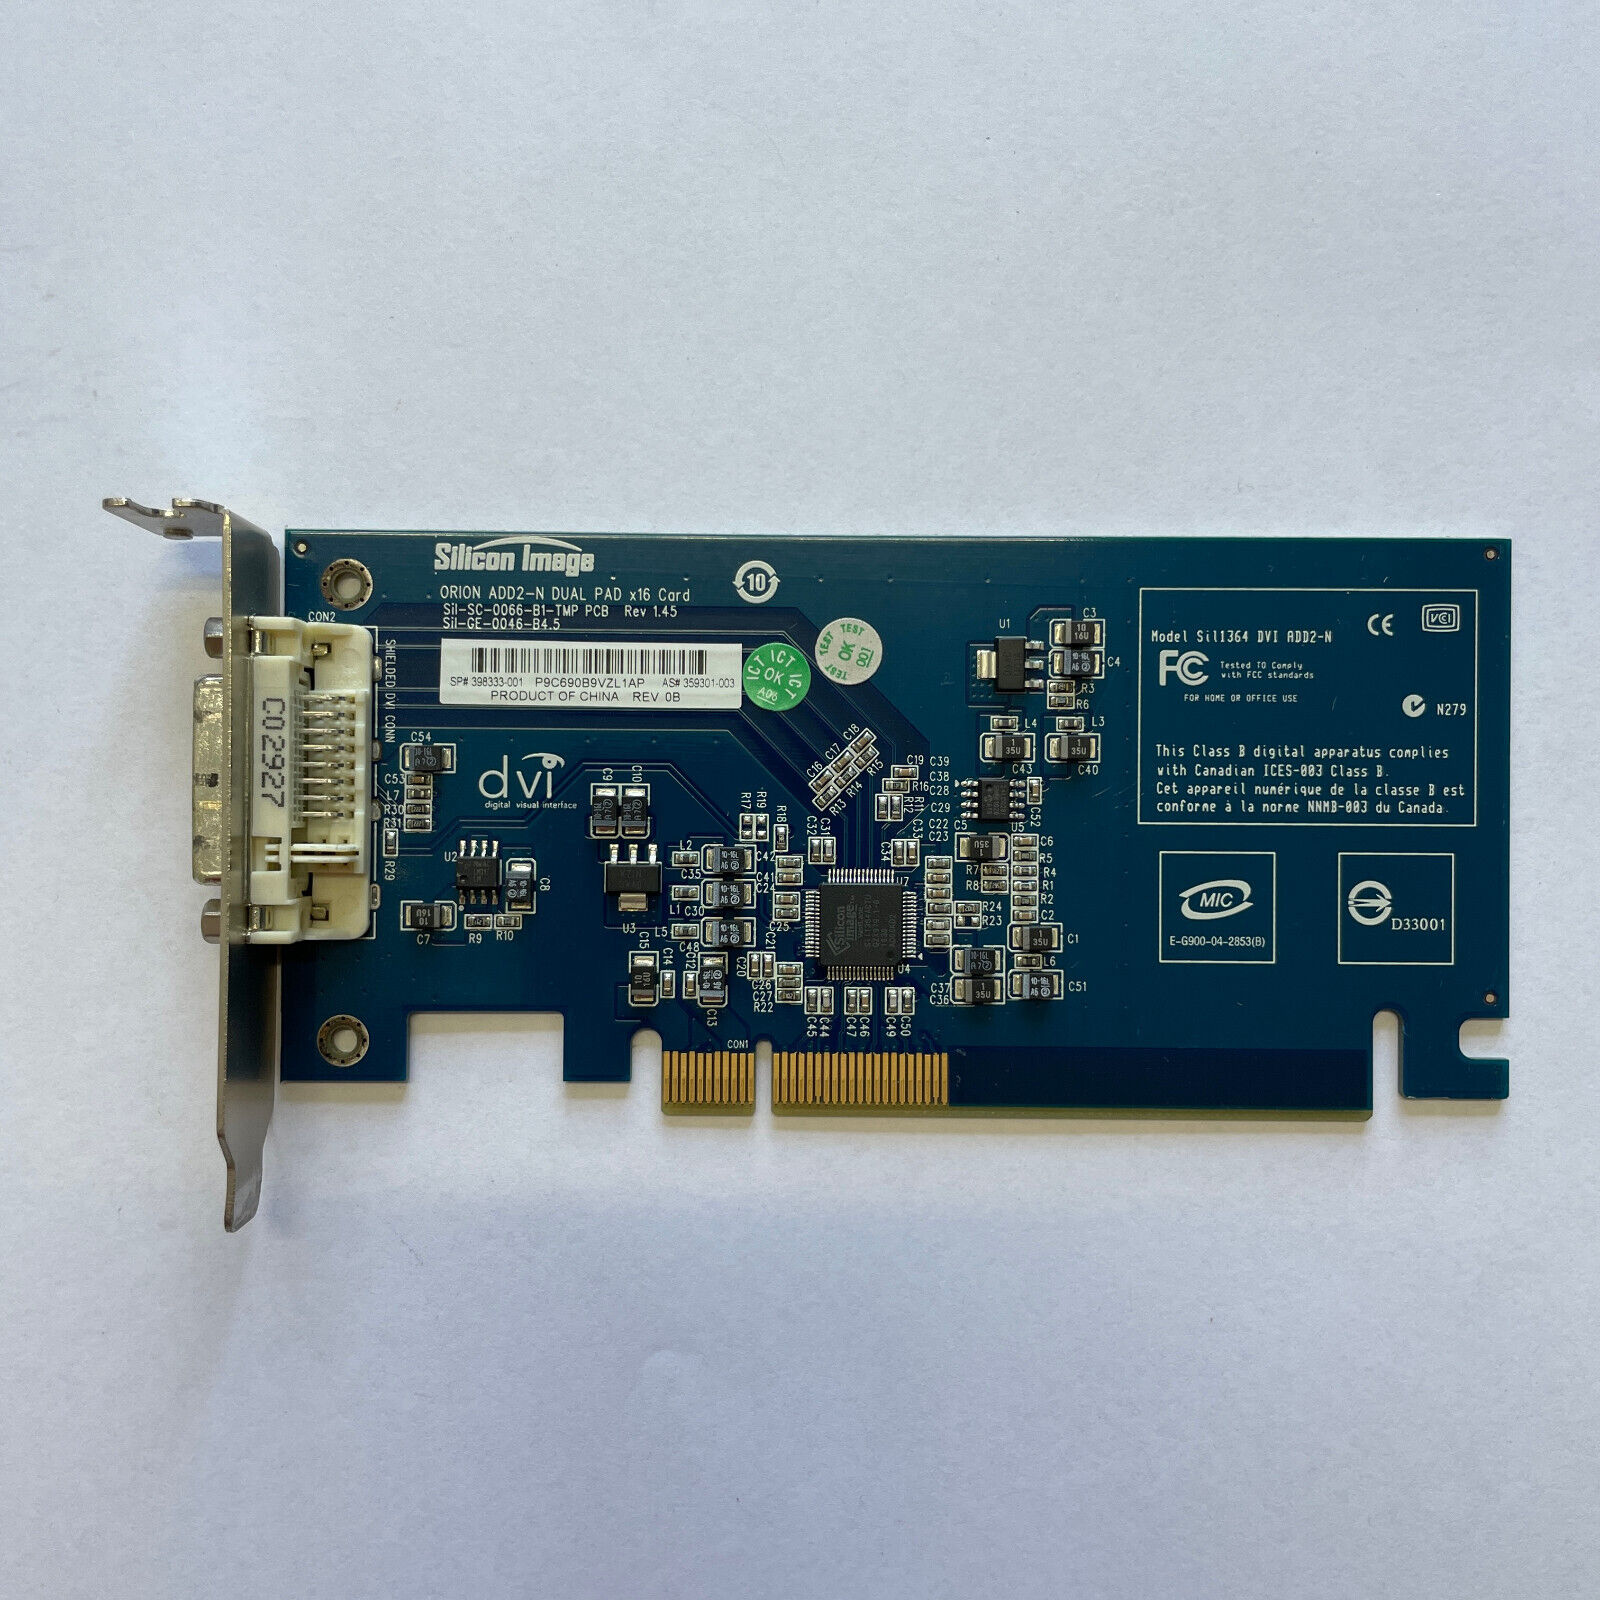 Silicon Image DVI Graphics Add-on Card PCIe x16 Sil1364 ADD2-N HP 398333-001